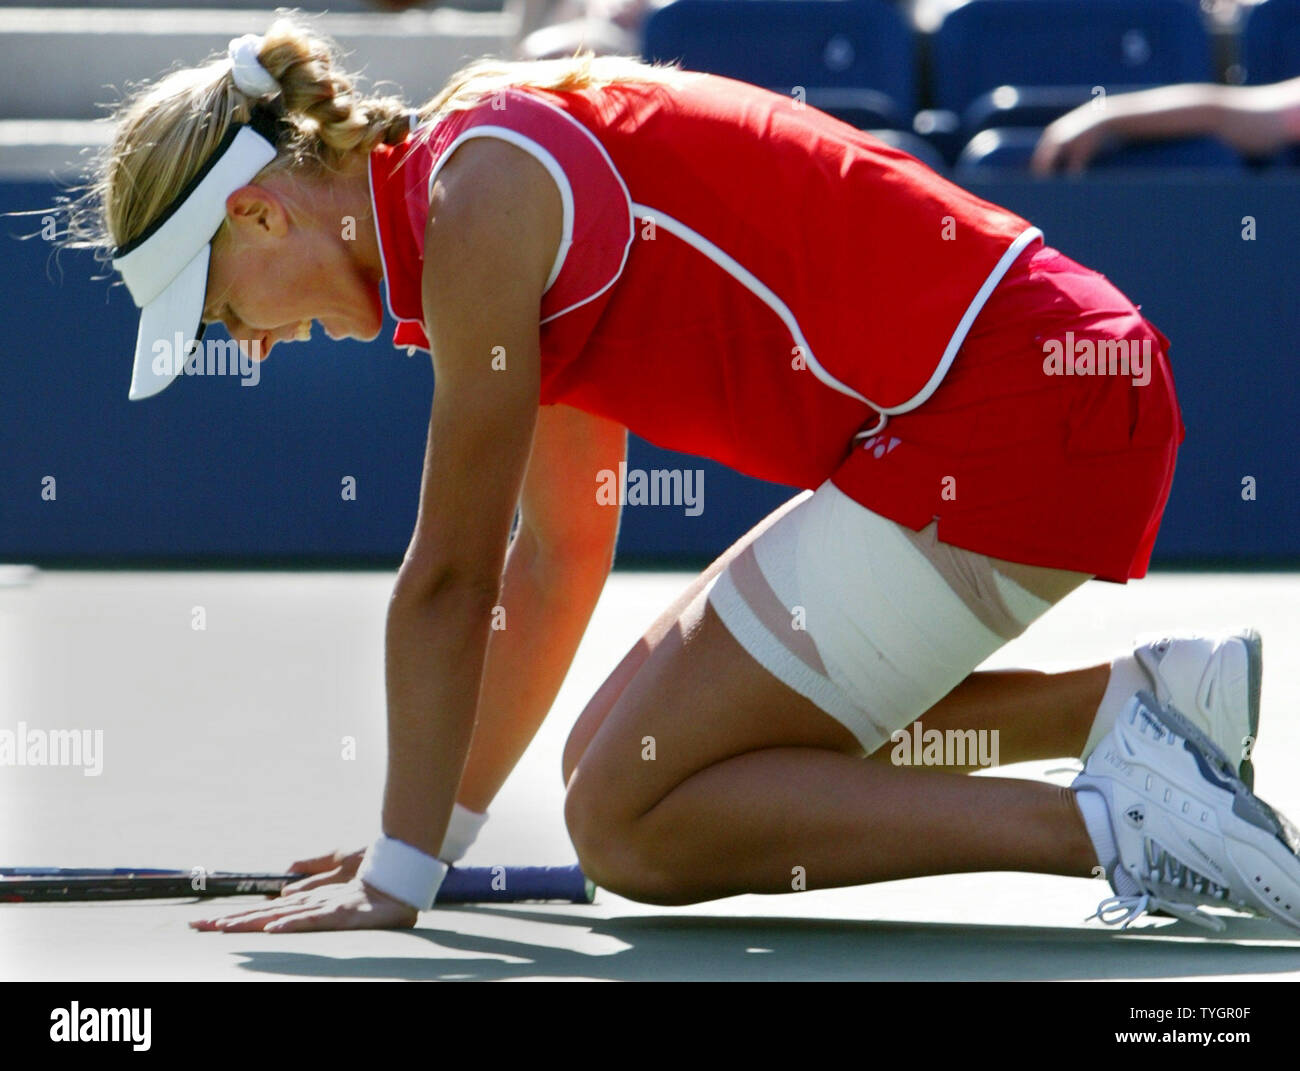 Elena Dementieva of Russia winces in pain as she plays with an injured leg  against top seeded Amelie Mauresmo of France at the 2004 US Open held at  the National Tennis Center